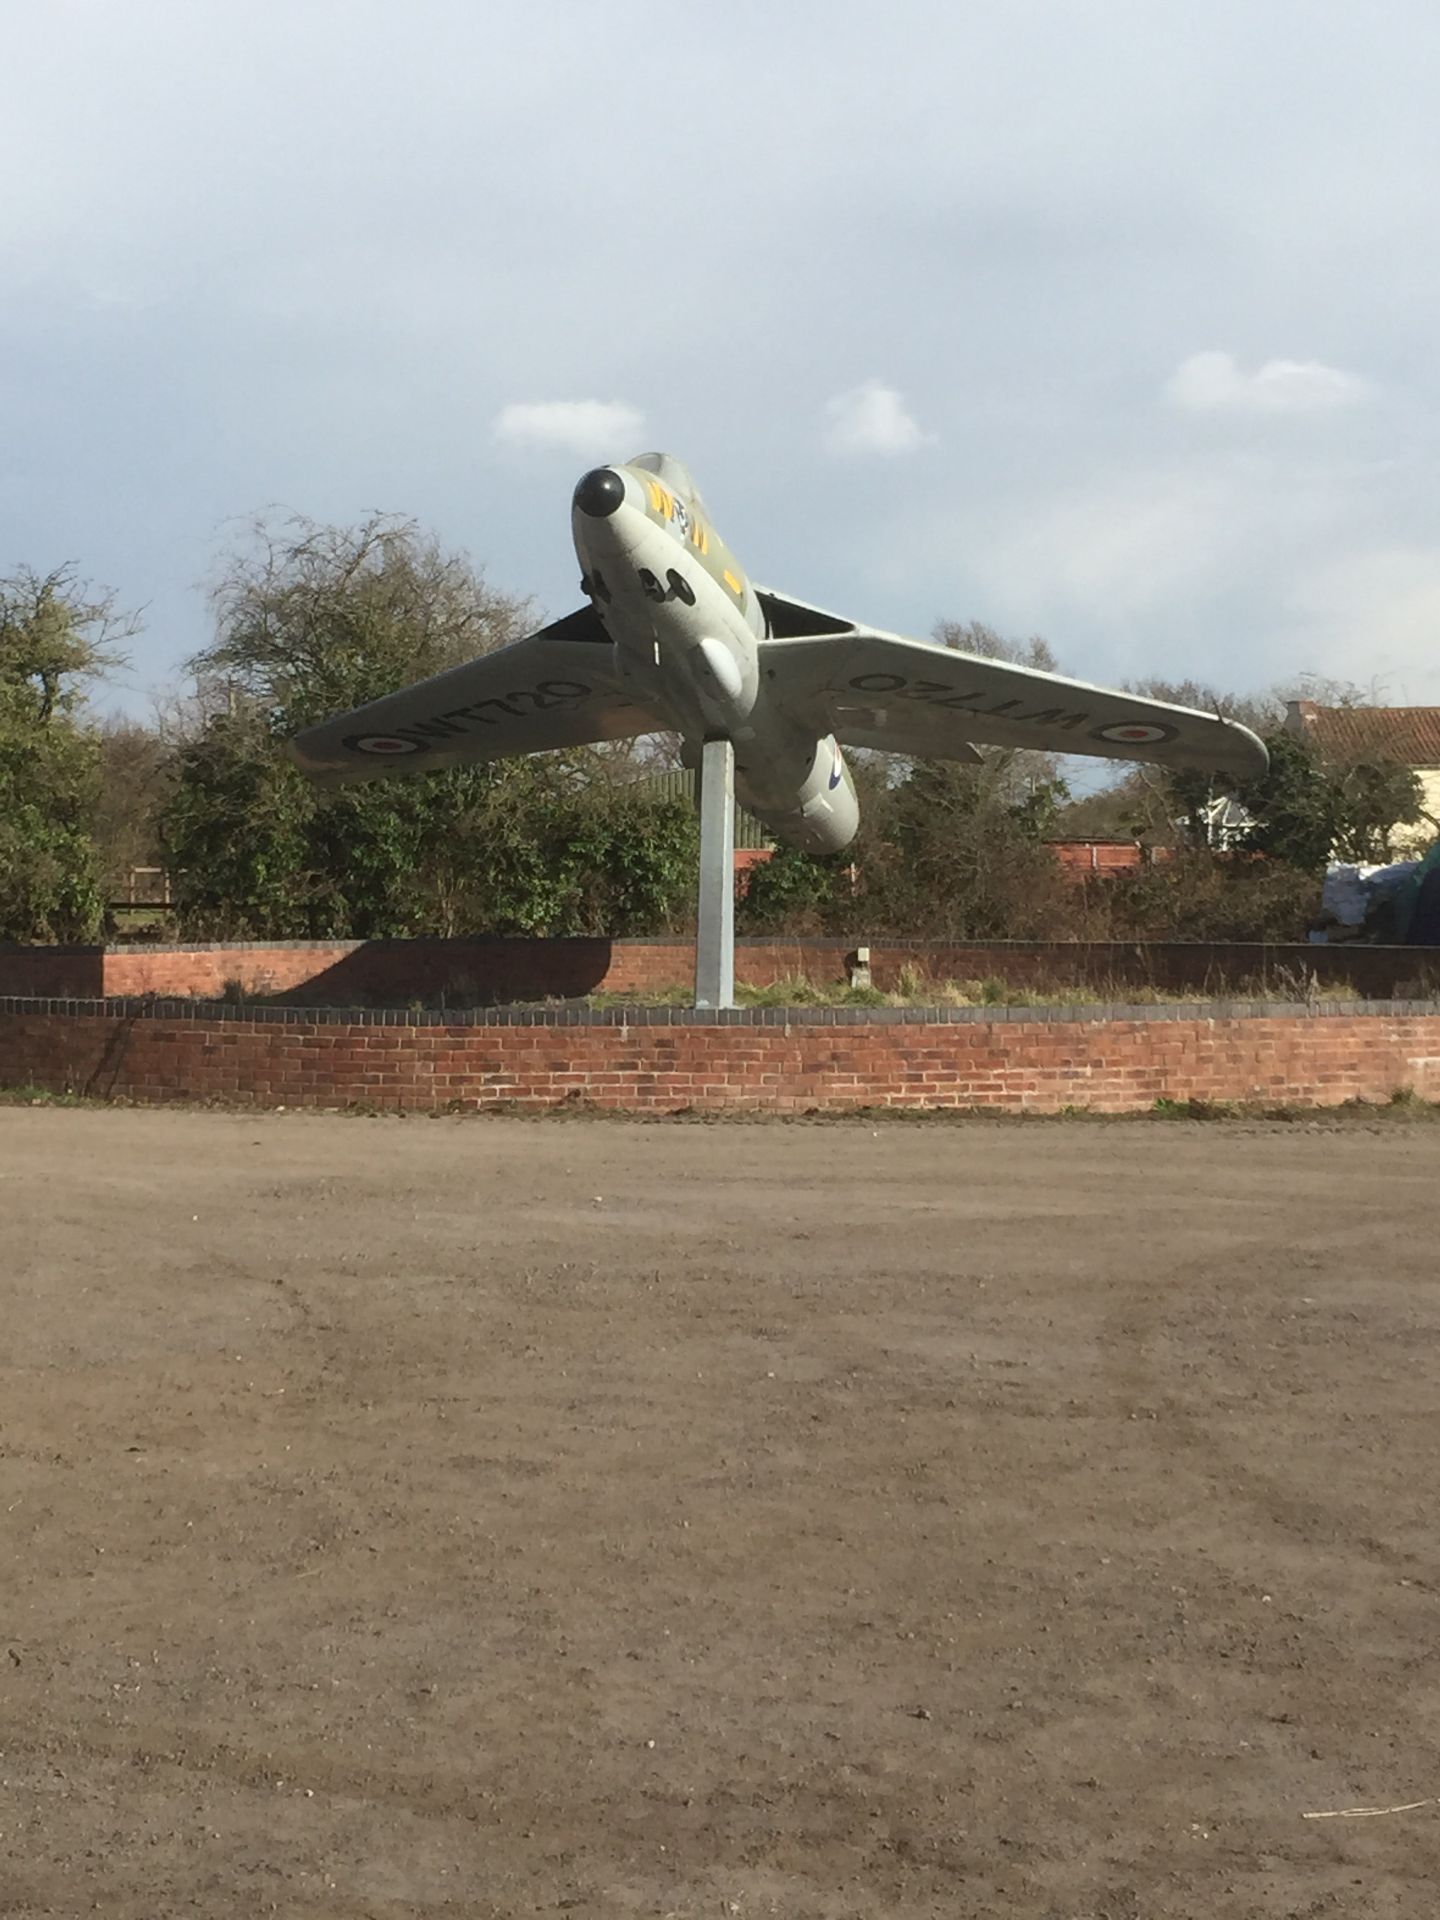 Hawker Hunter Jet - Comes With Stand. Wings are detachable for transport